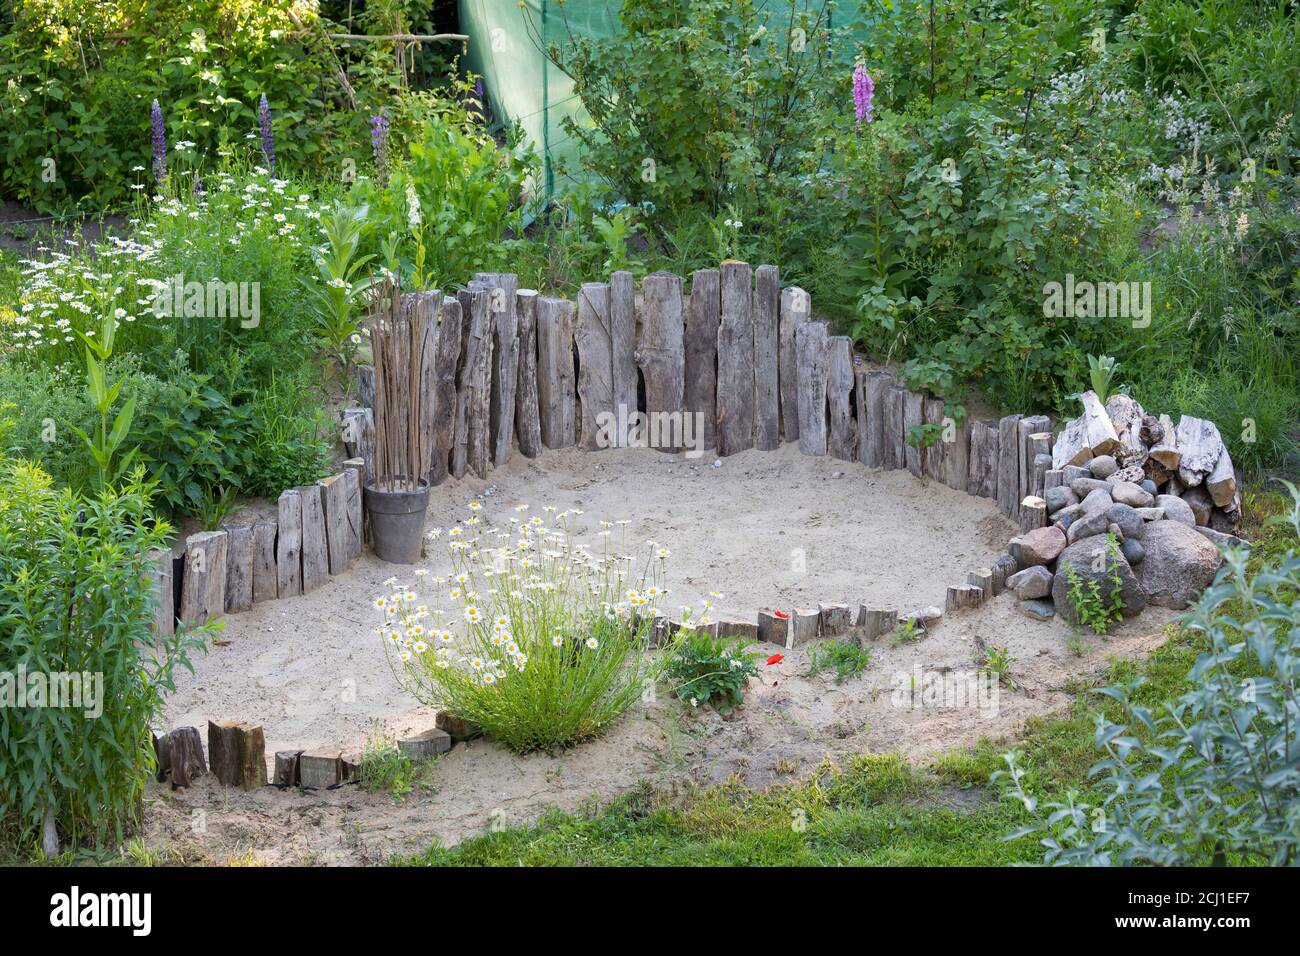 breeding place for insects on sand in a garden, Germany Stock Photo